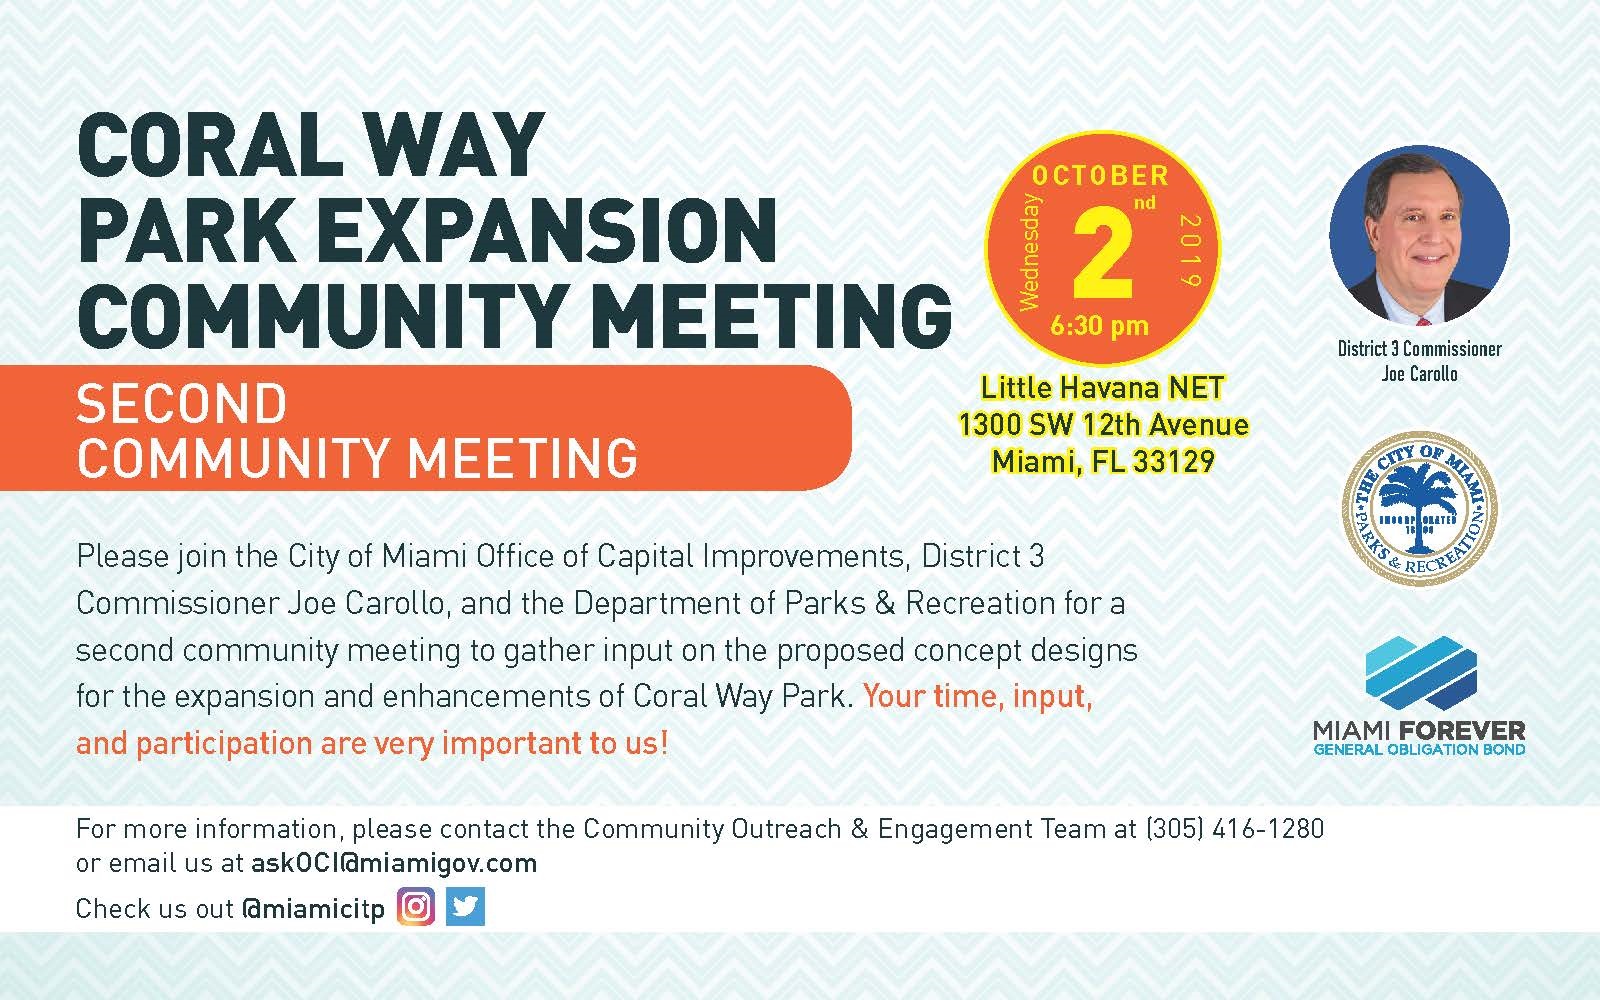 Coral-Way-Park-Expansion-Enhancements-2nd-Community-Meeting-10.2.19.jpg